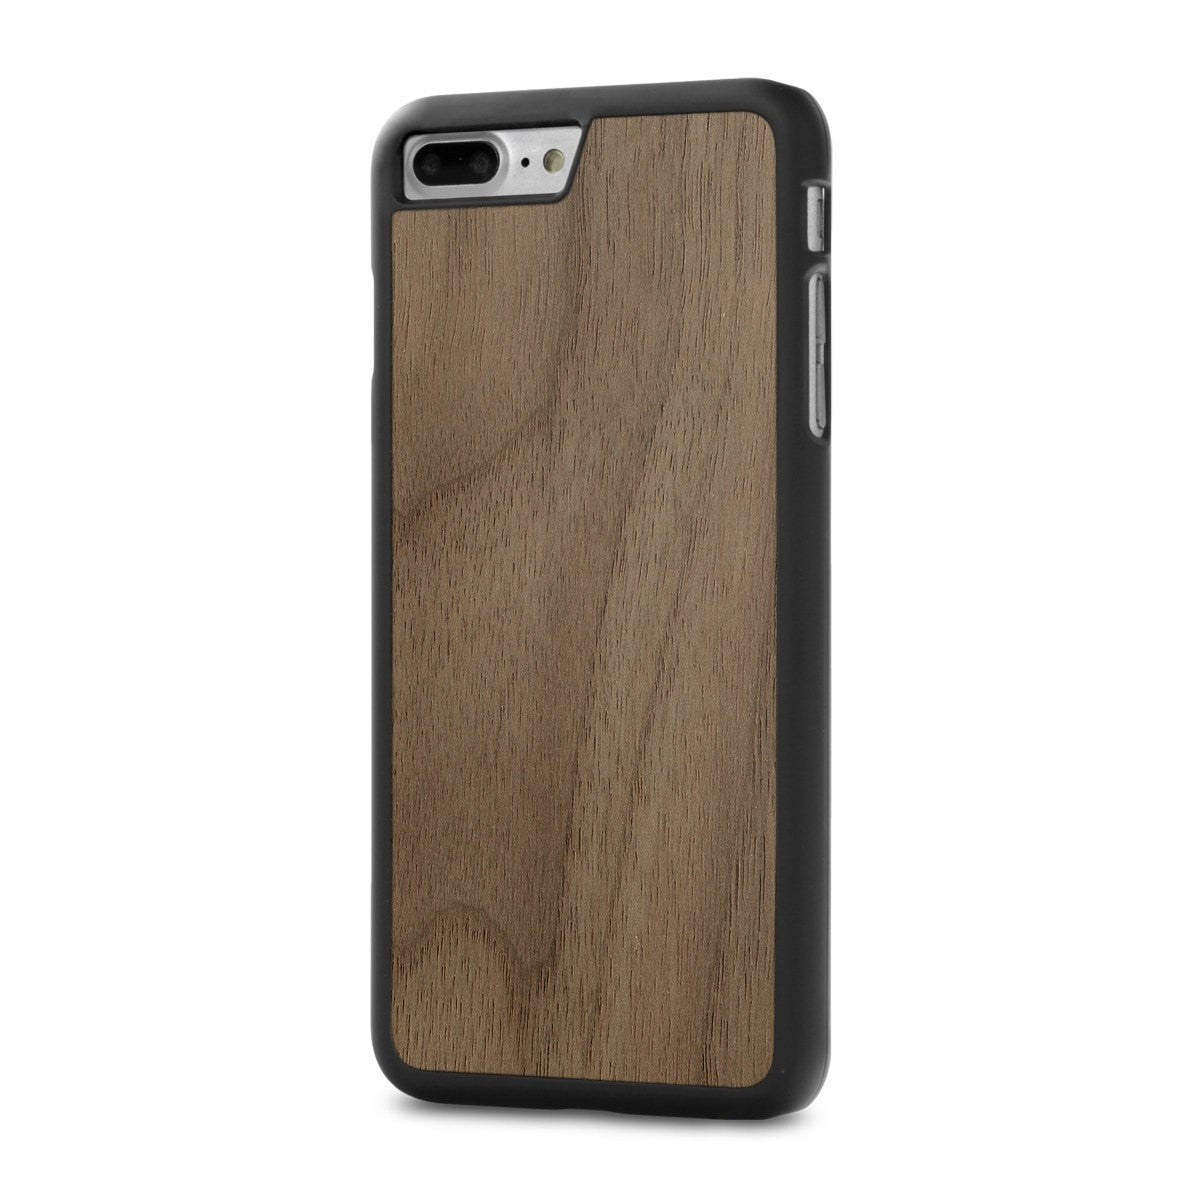  iPhone 7 Plus —  #WoodBack Snap Case - Cover-Up - 1